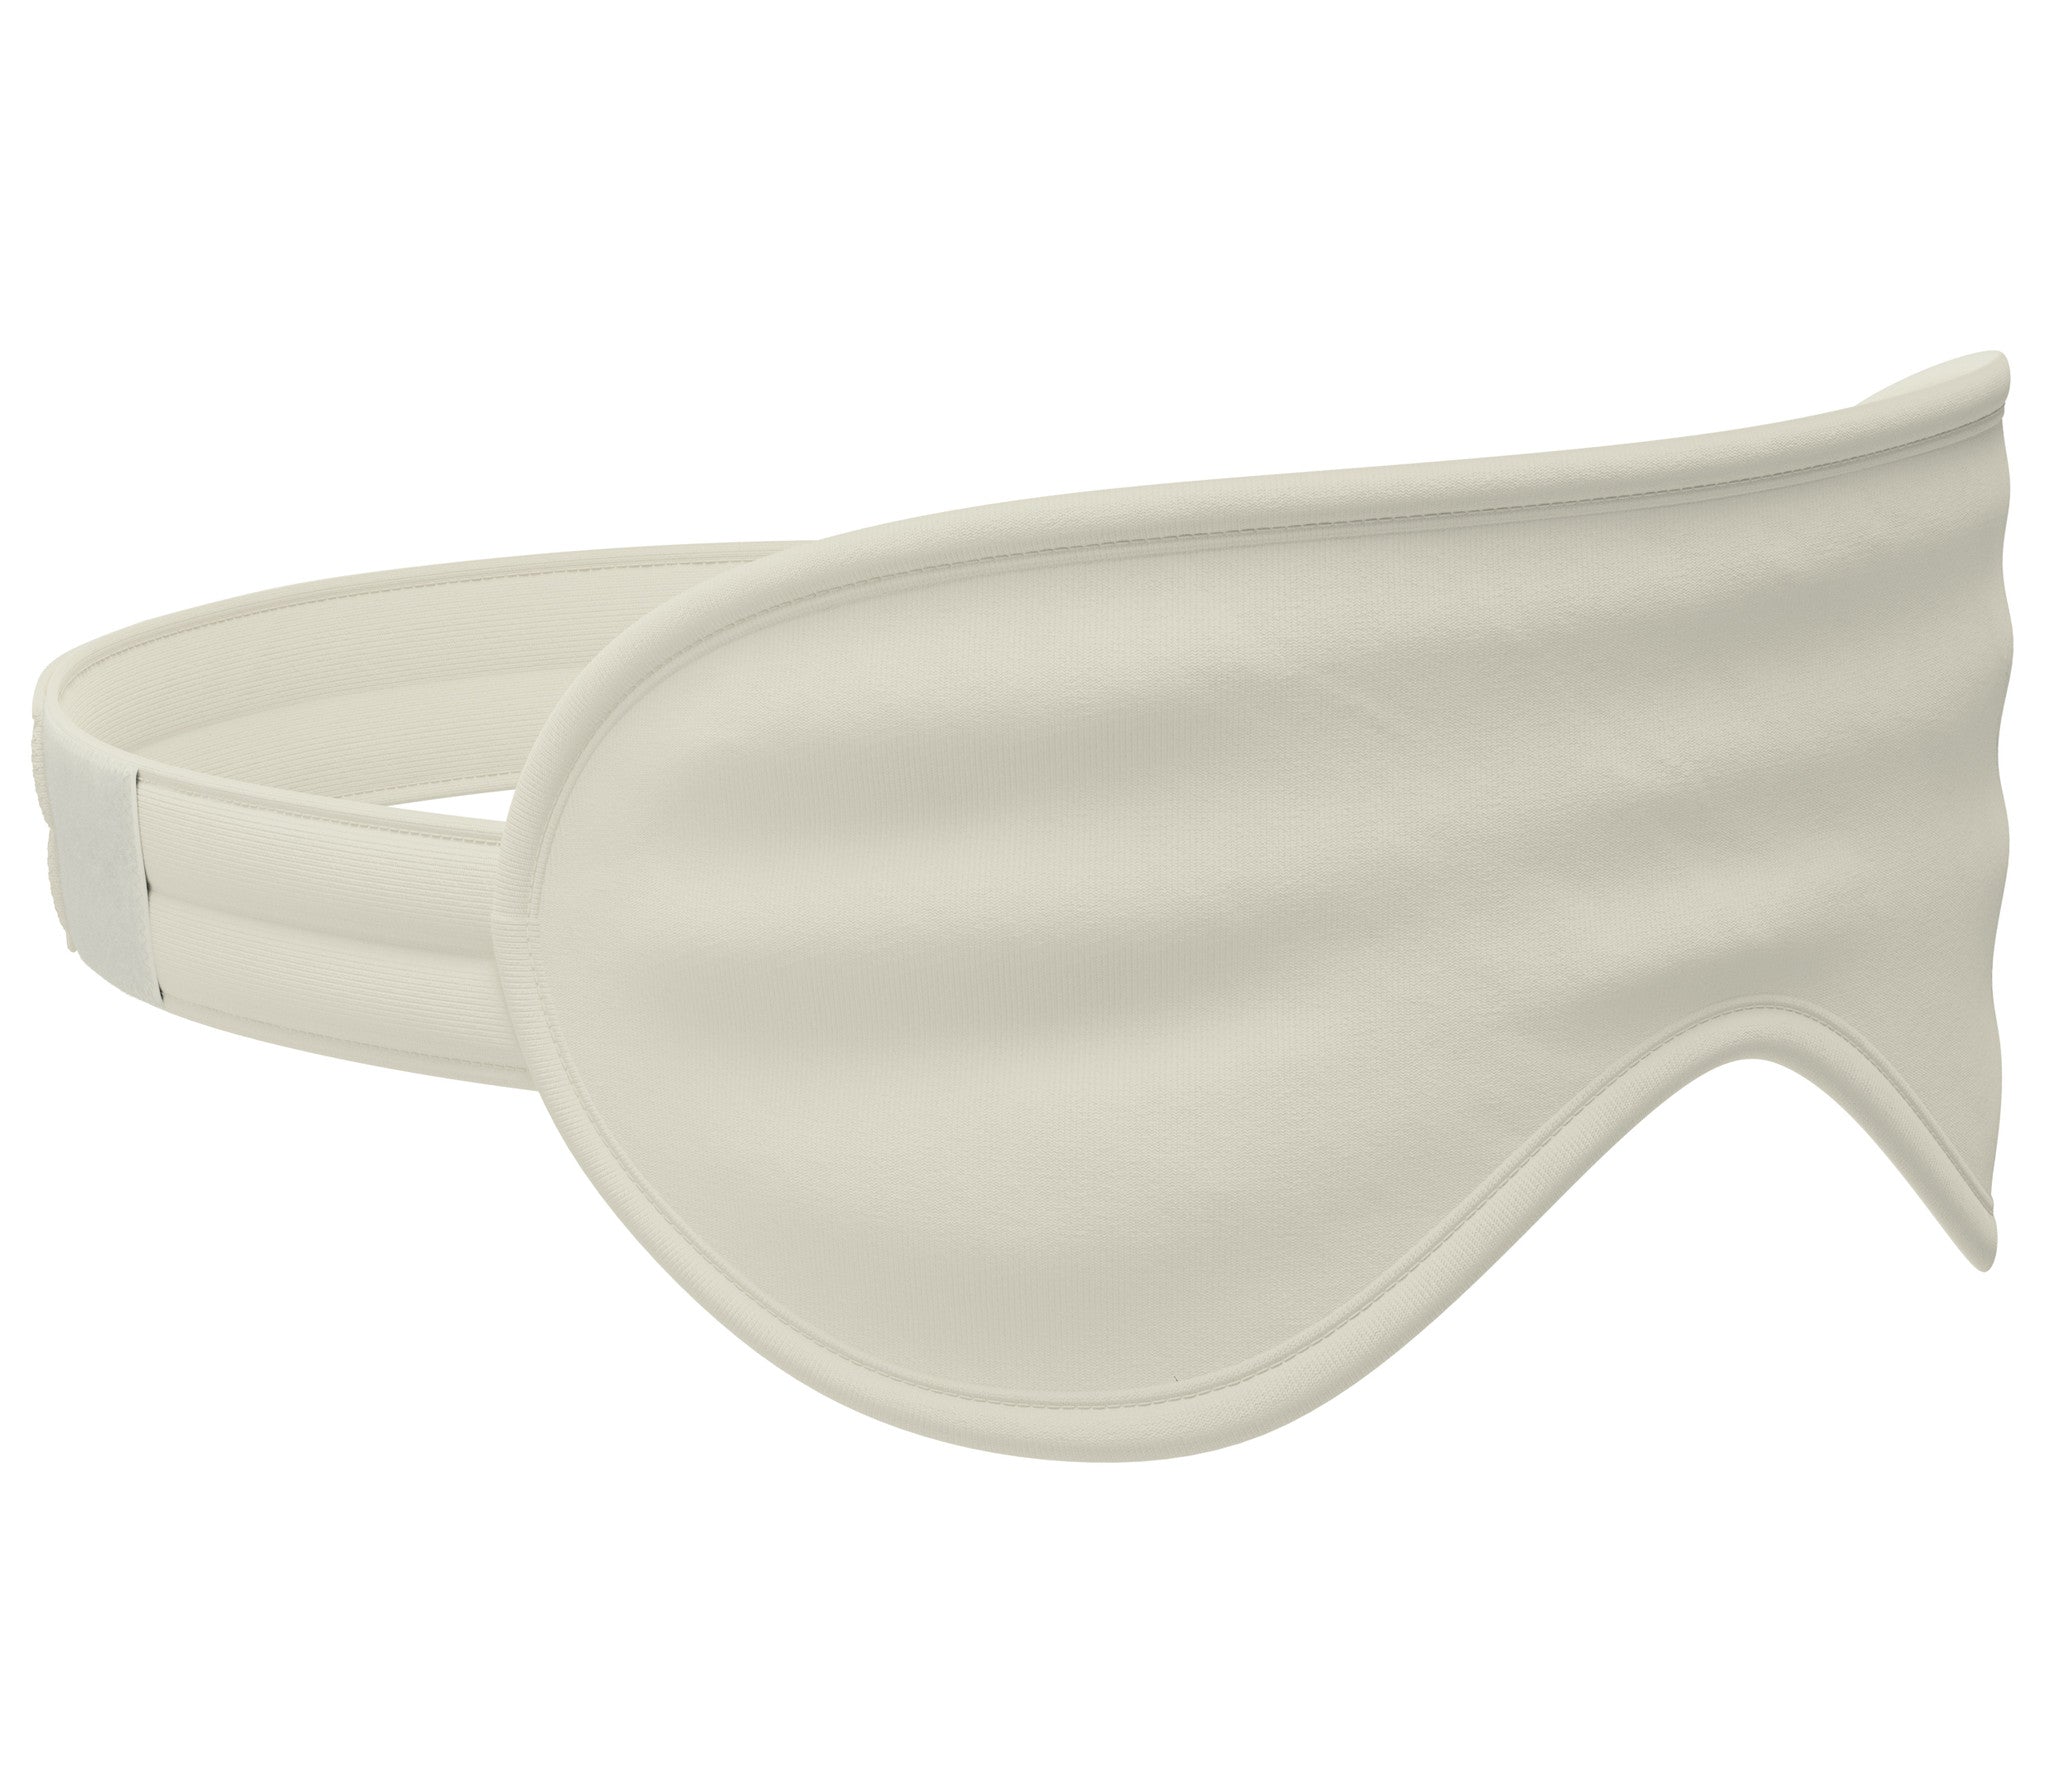 Sleep Eye Mask - Truly Hypoallergenic - 100% Cotton, Cottonique -  Allergy-free Apparel